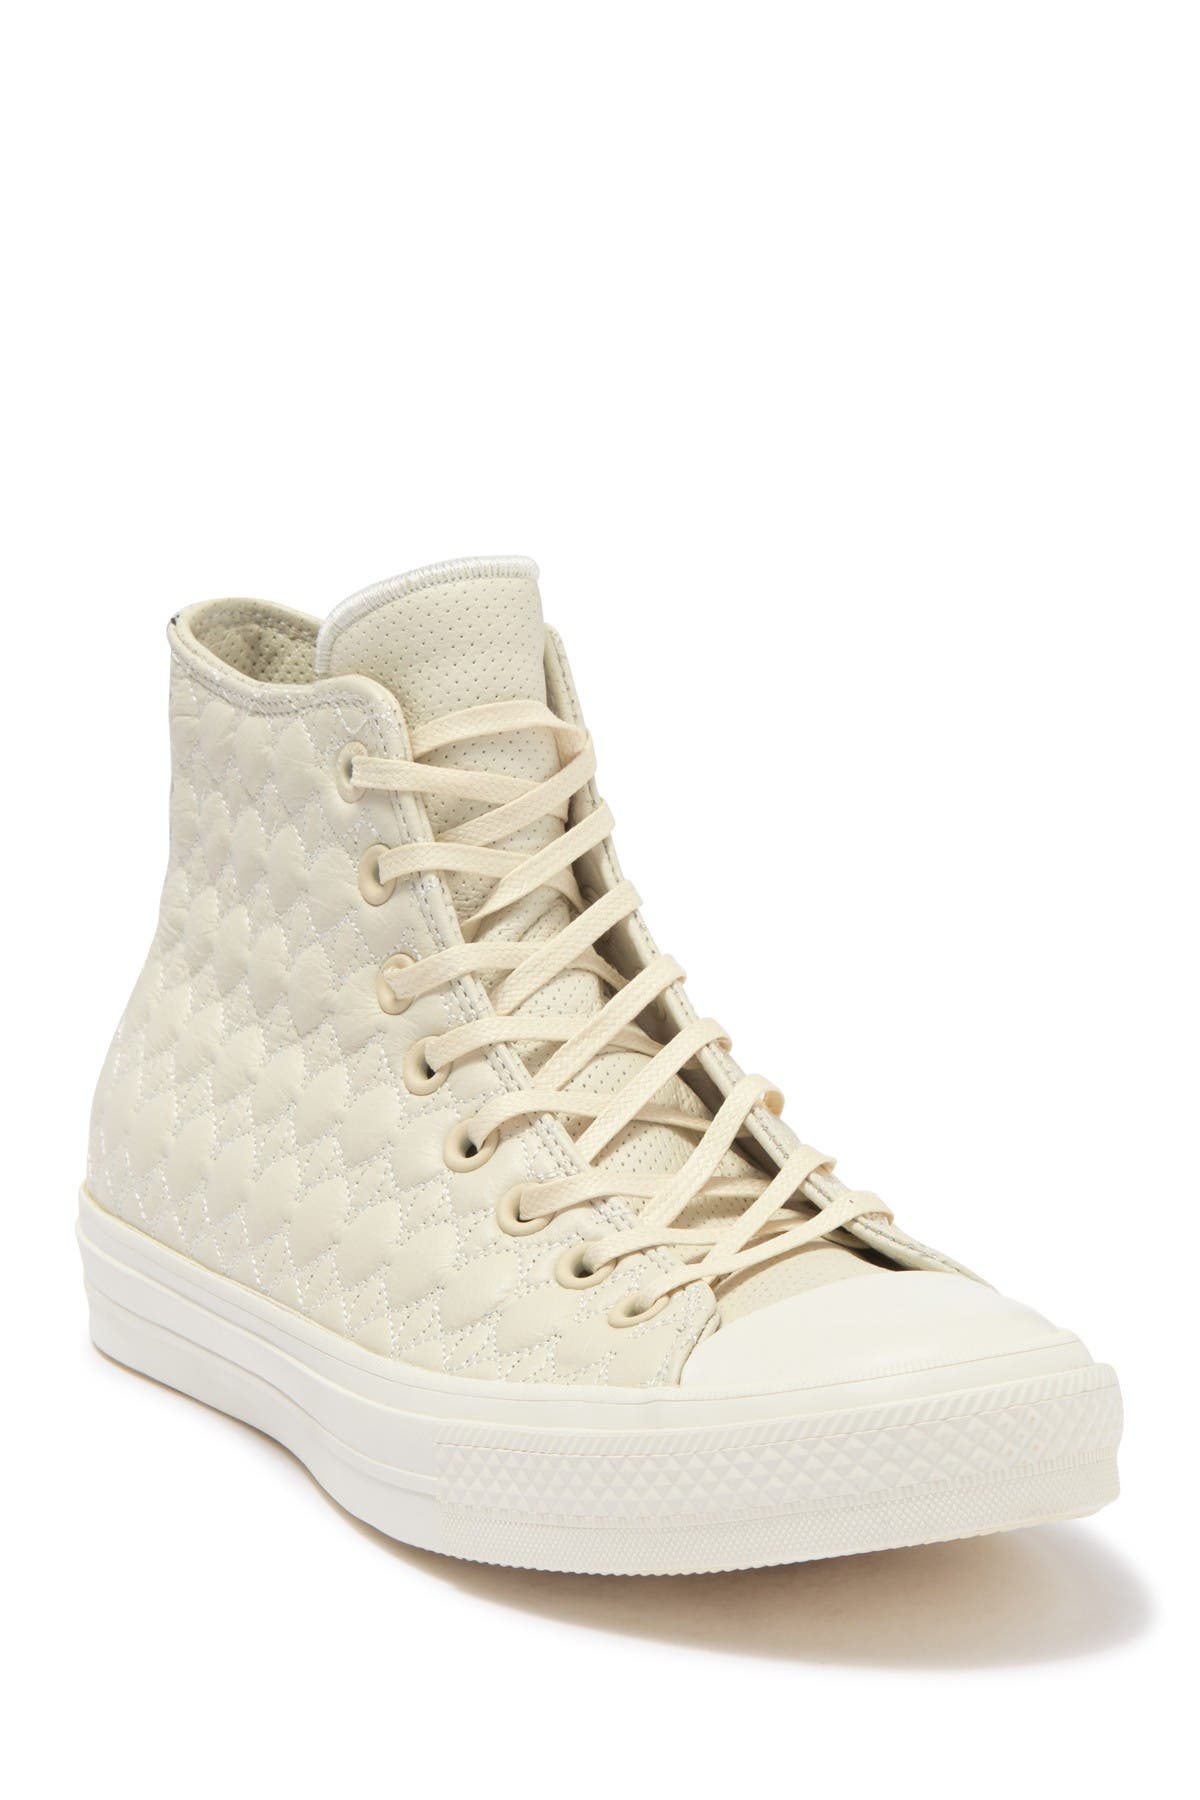 Converse | Chuck Taylor All-Star II High Top Quilted Leather Sneaker |  Nordstrom Rack